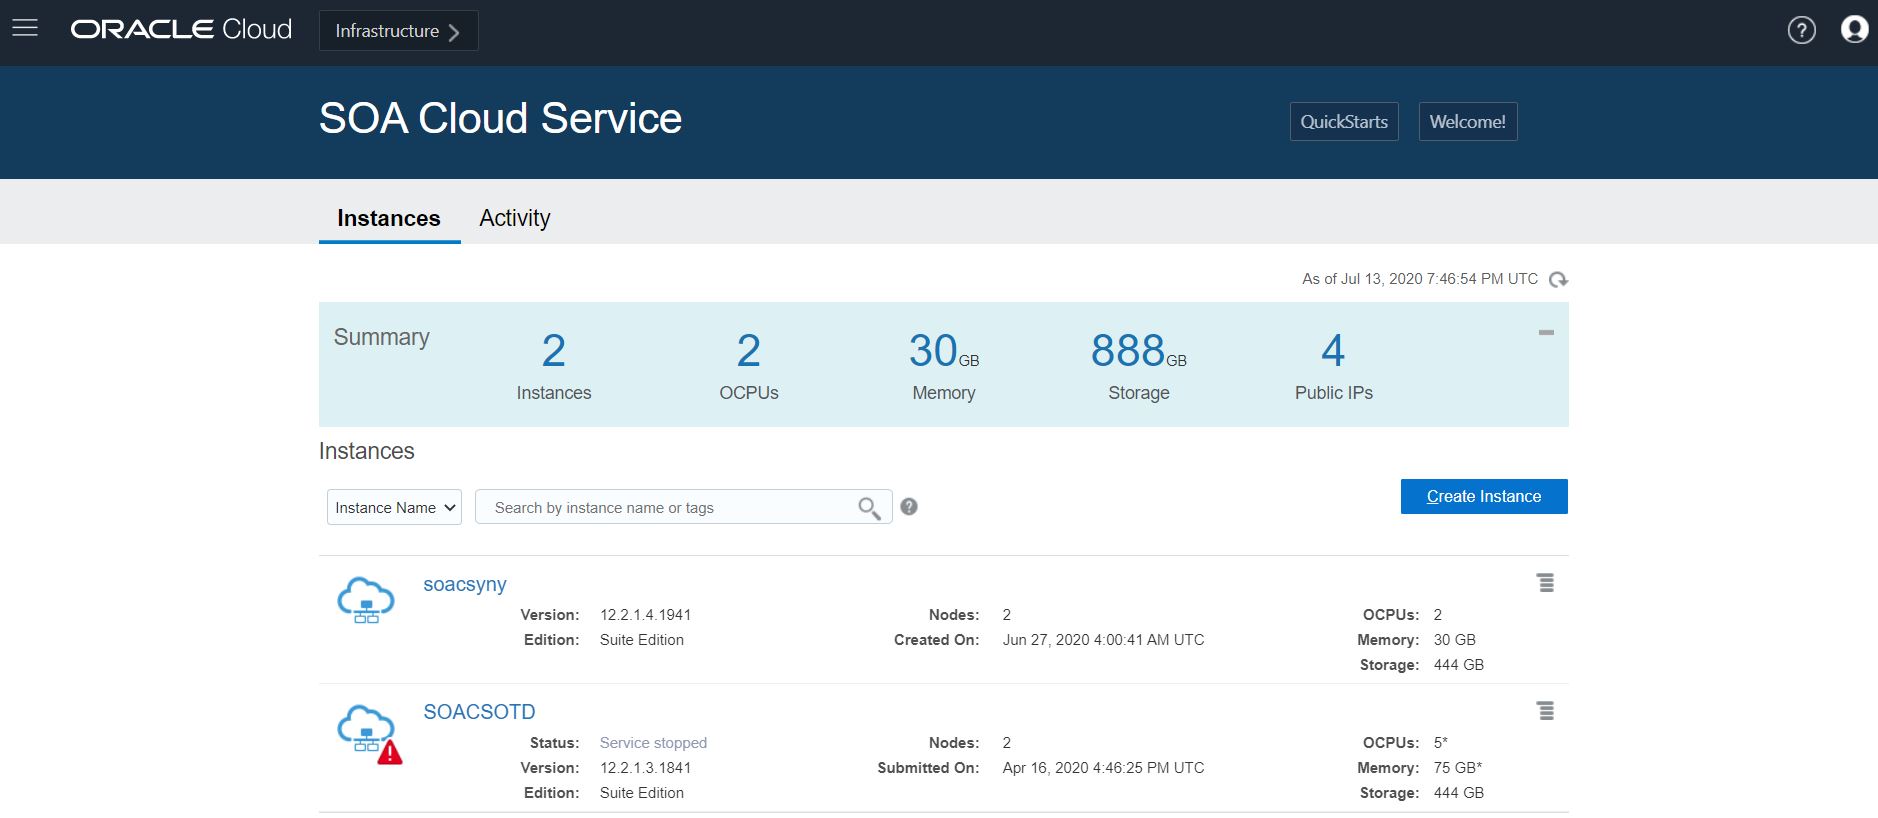 Oracle SOA Cloud Service Console in Oracle Cloud Infrastructure